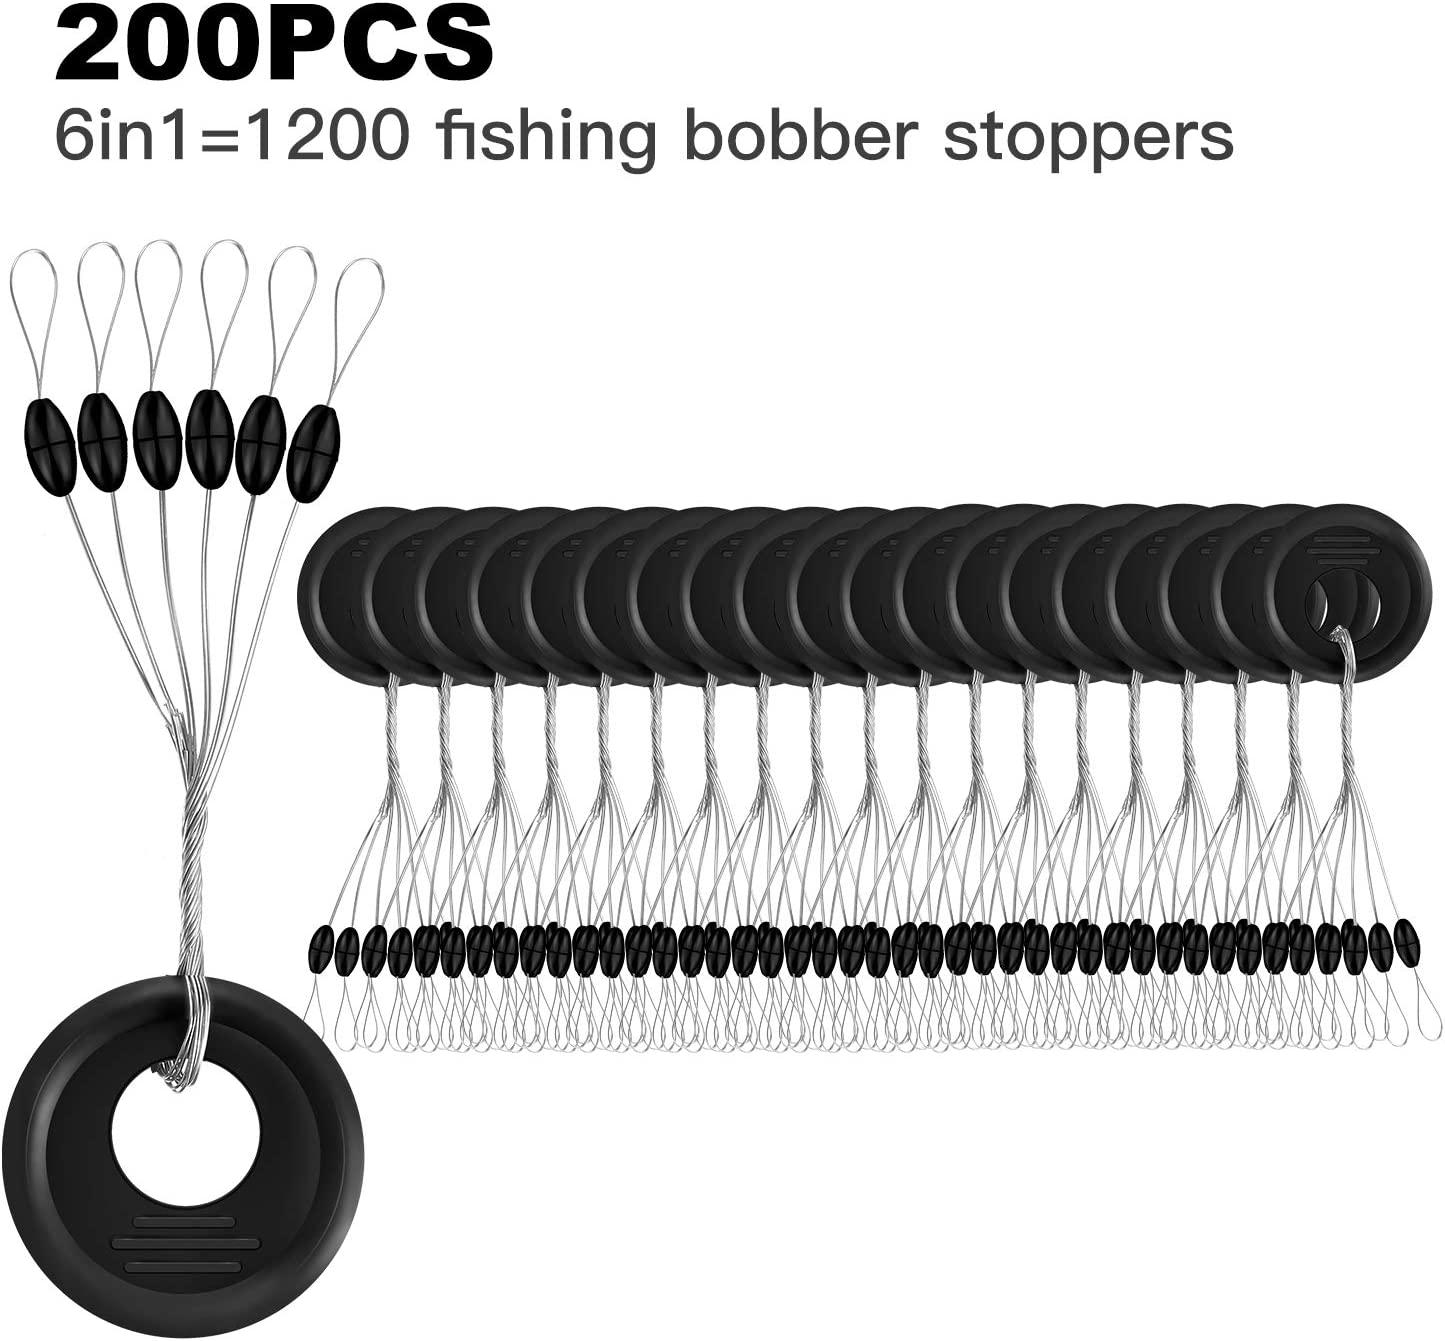 PATIKIL Fishing Rubber Bobber Beads Stoppers, 300 Pieces 6 in 1